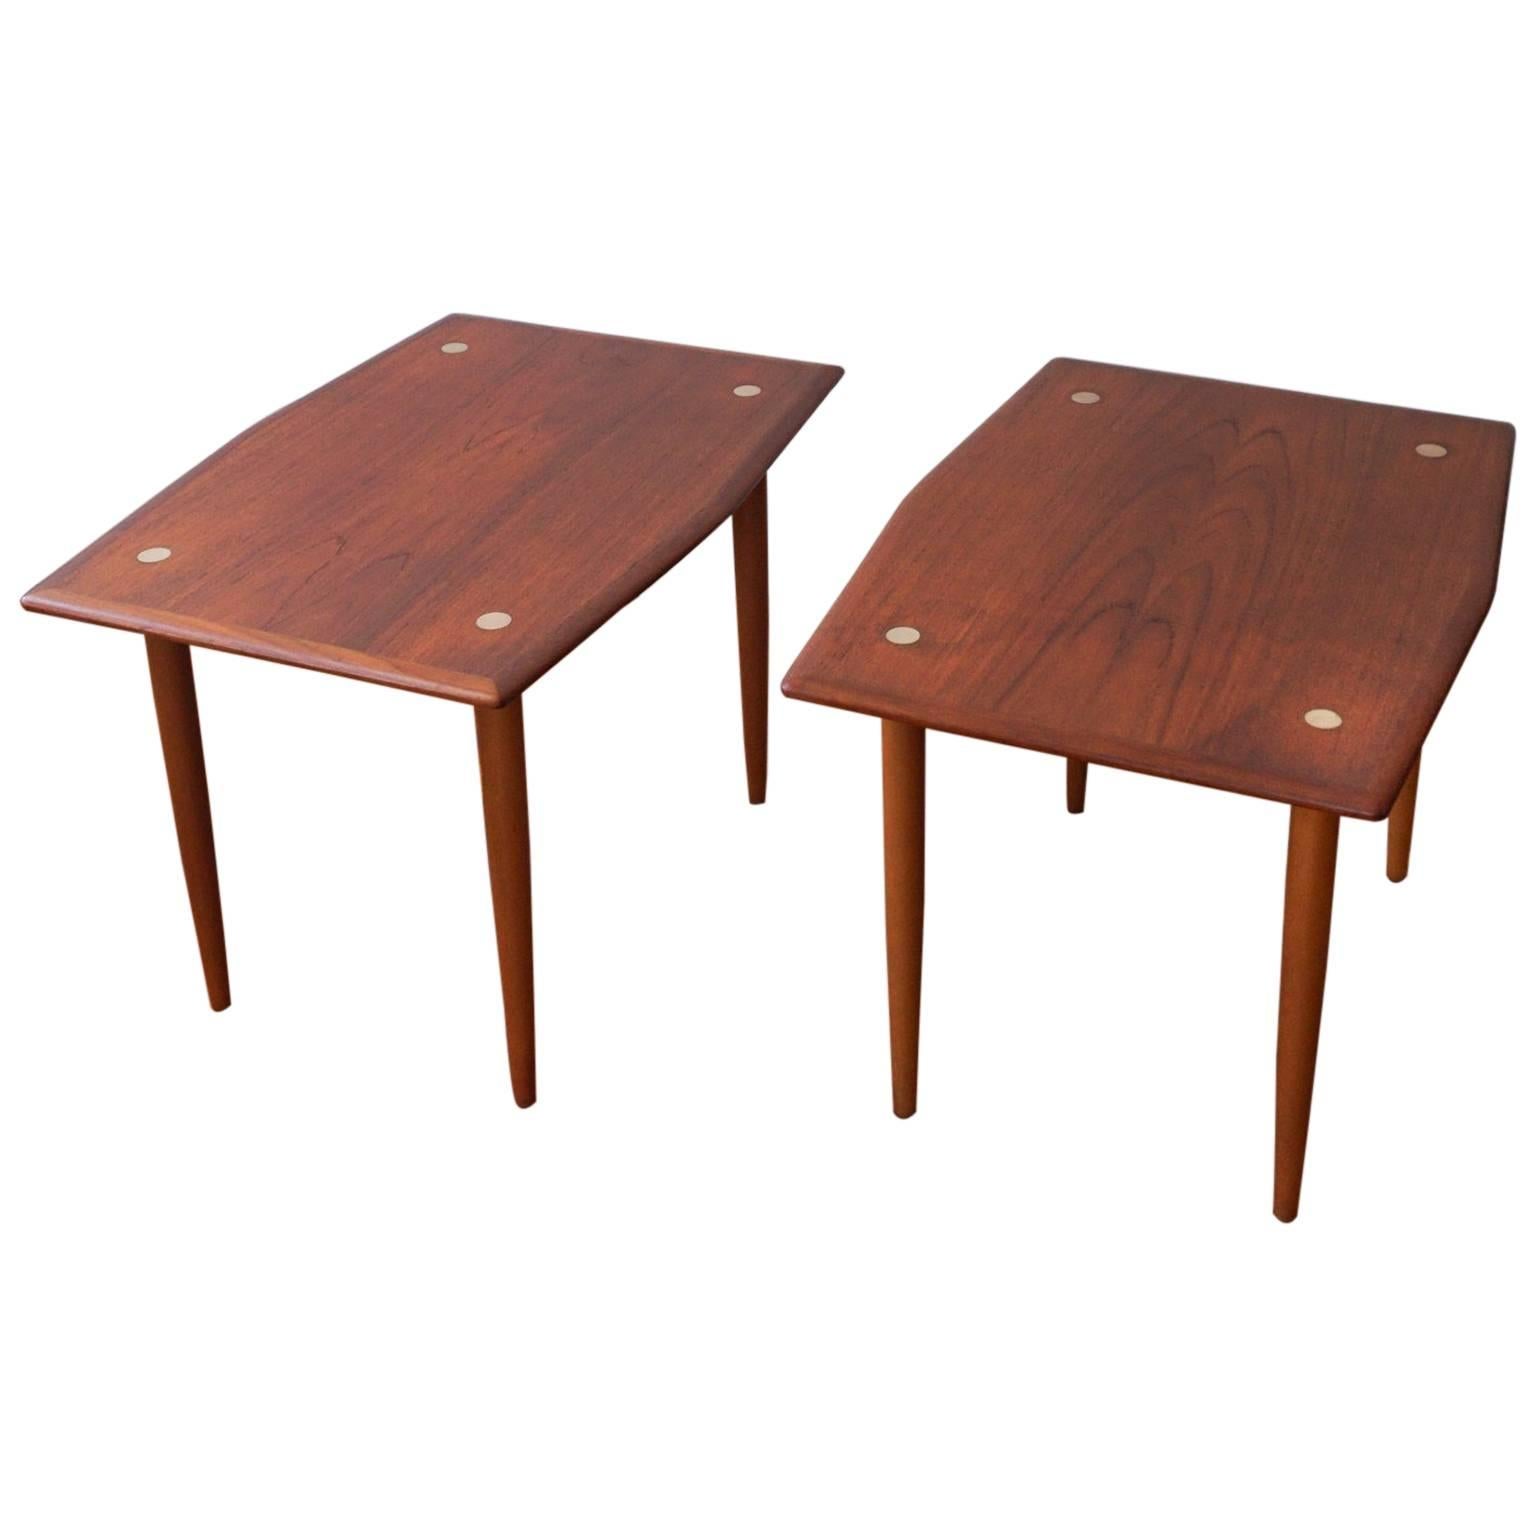 Pair of Scandinavian Teak Side Tables with Brass Elements by DUX